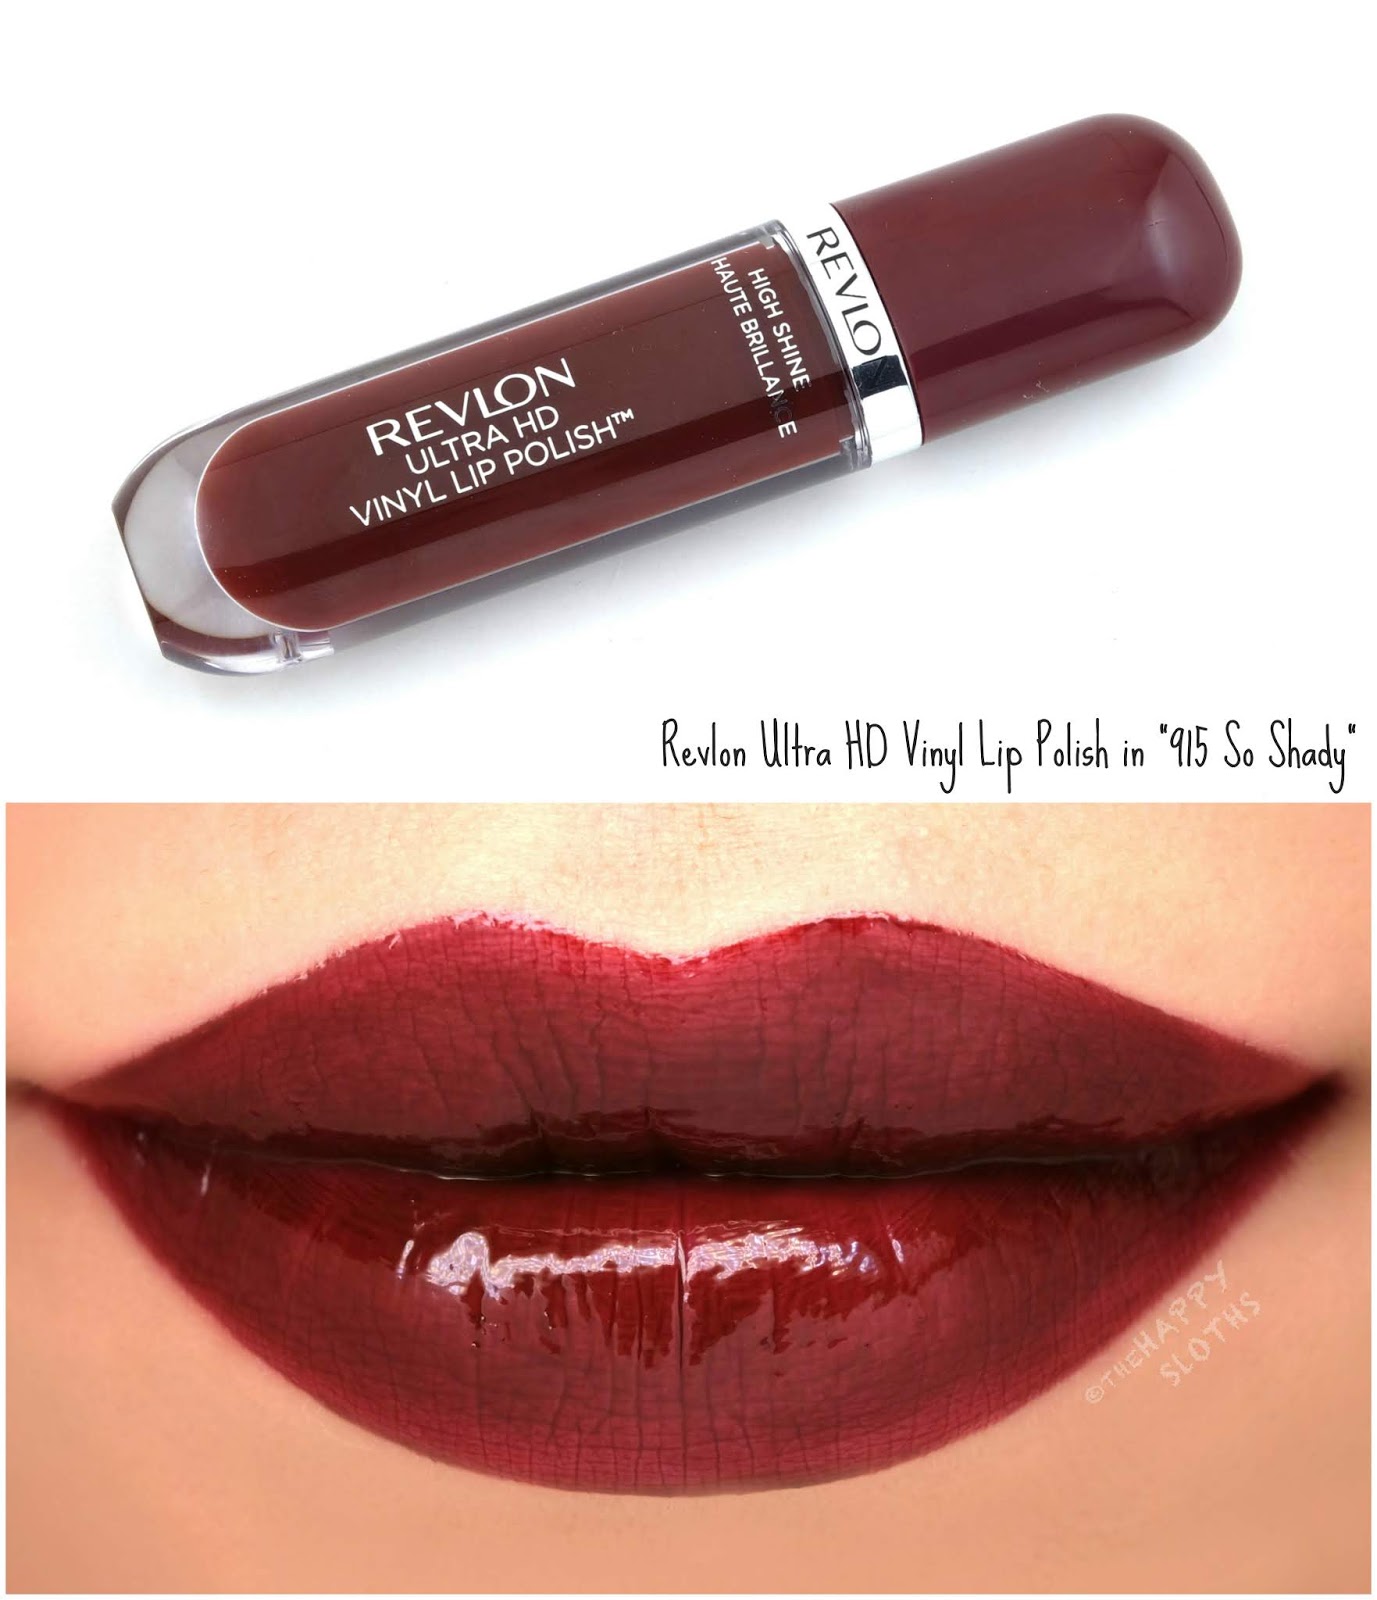 Revlon | Ultra HD Vinyl Lip Polish in "915 So Shady": Review and Swatches